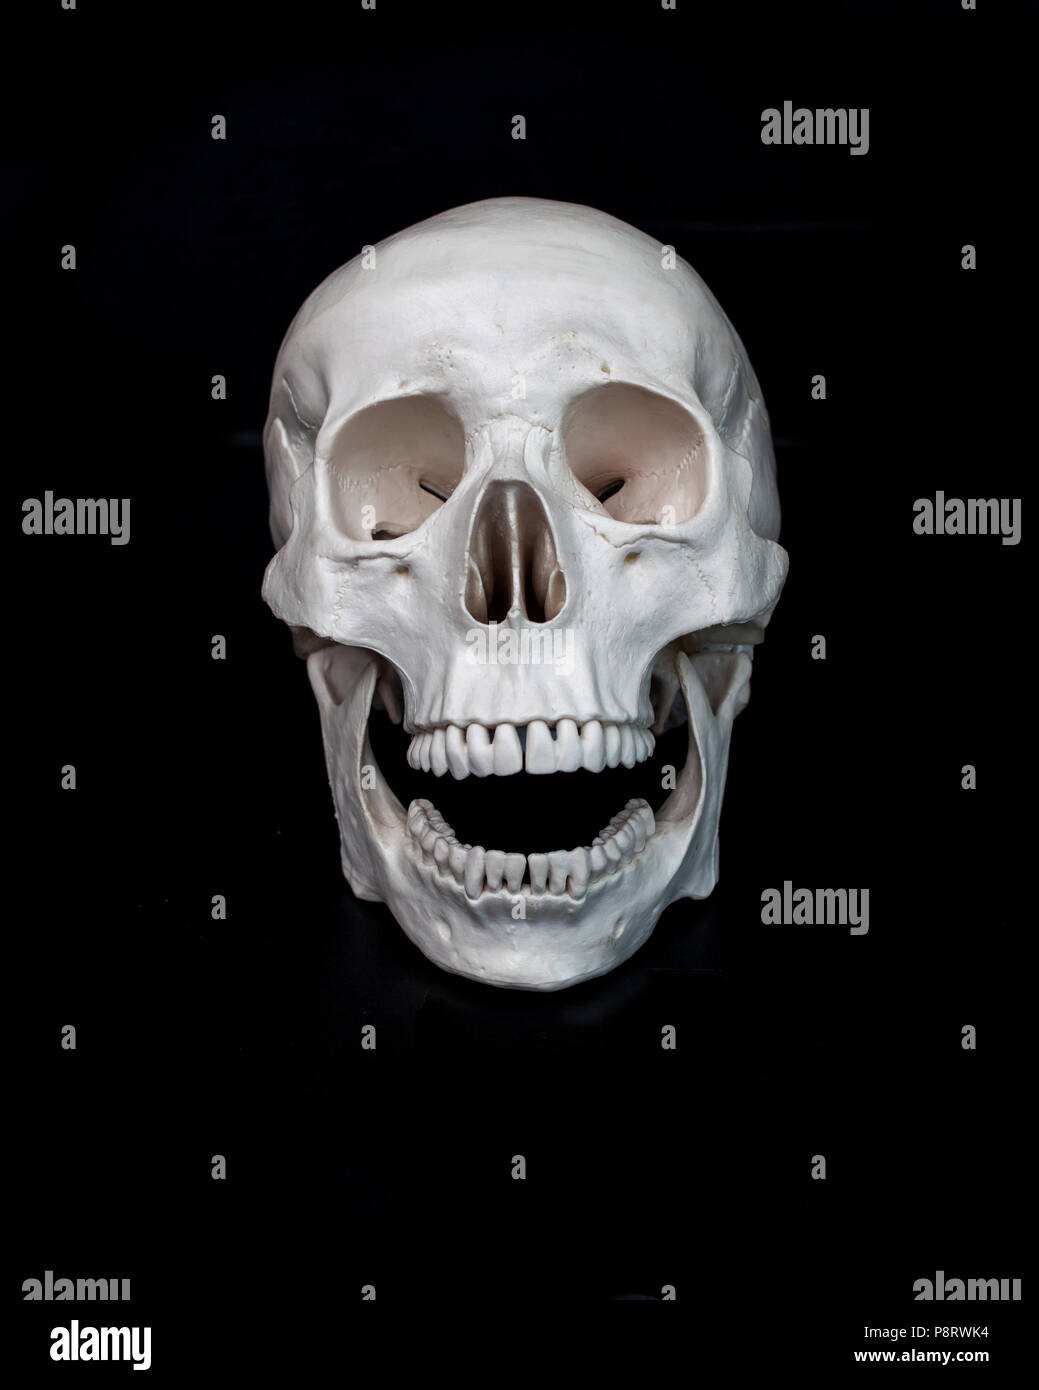 Skull. Human skull with its mouth open. Black background. Halloween concept free space Stock Photo